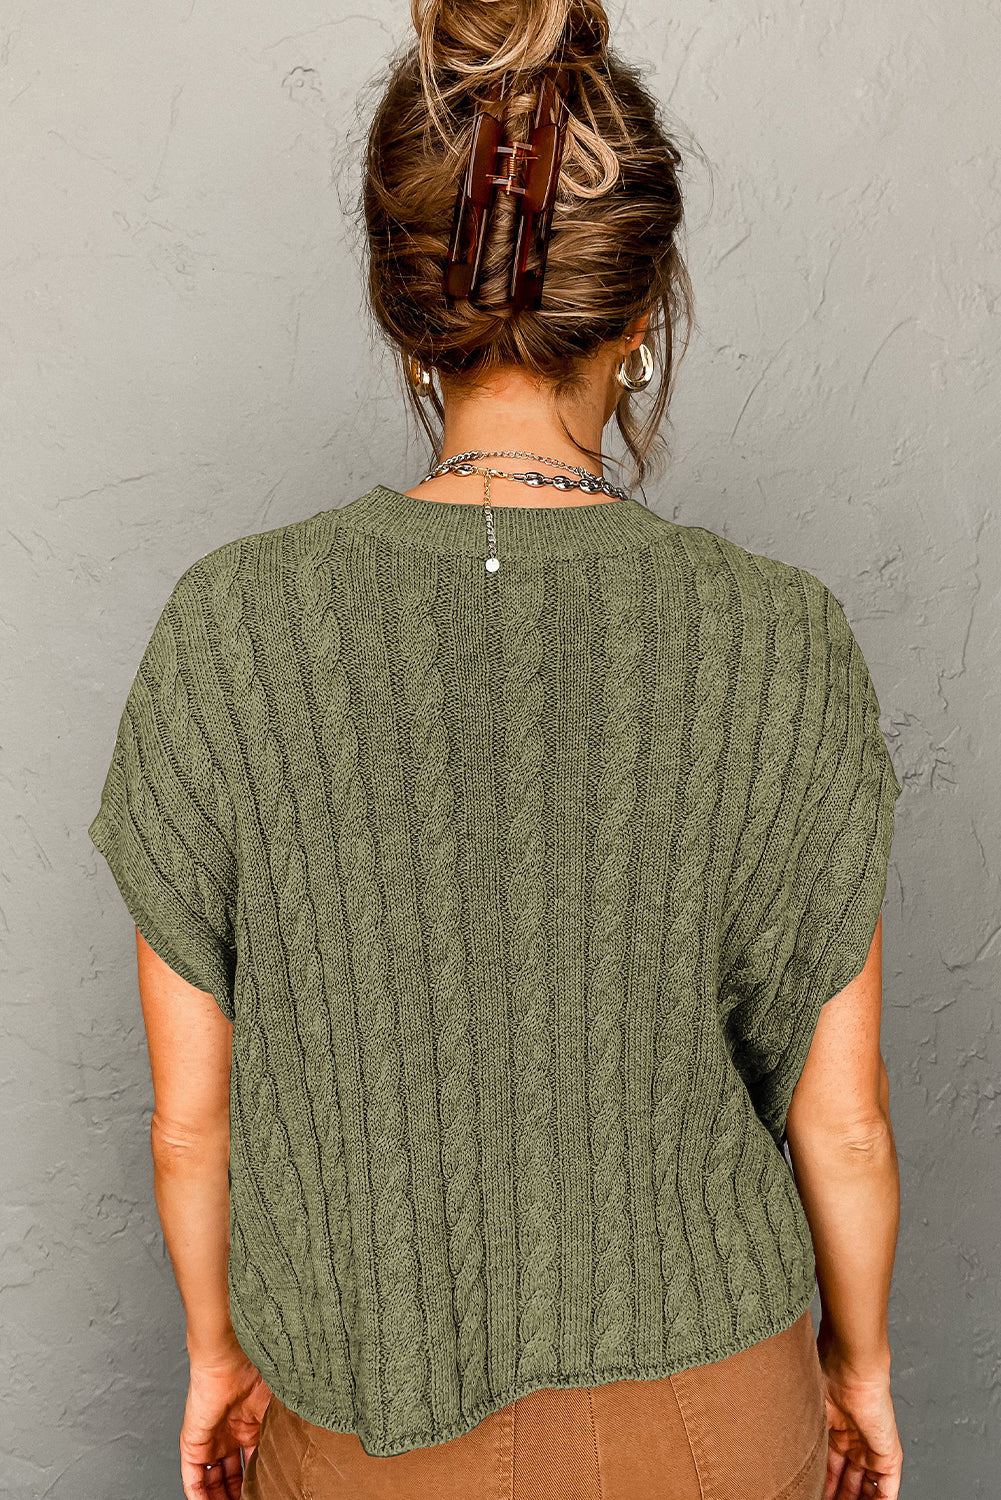 Laura Crew Neck Cable Knit Short Sleeve Sweater - Gold Cactus